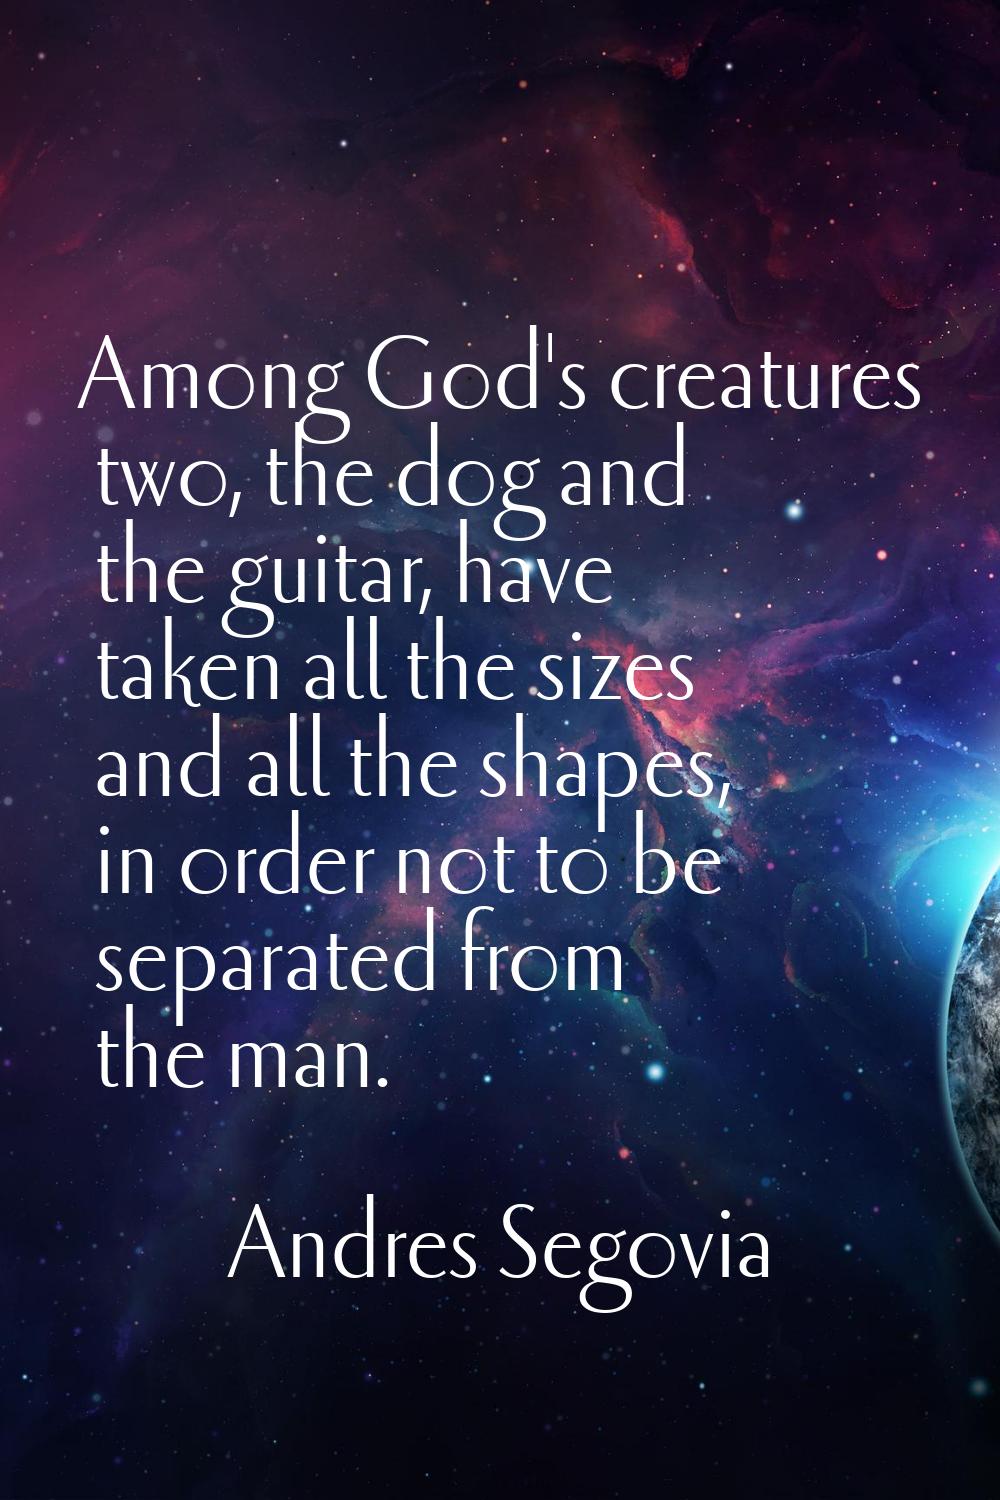 Among God's creatures two, the dog and the guitar, have taken all the sizes and all the shapes, in 